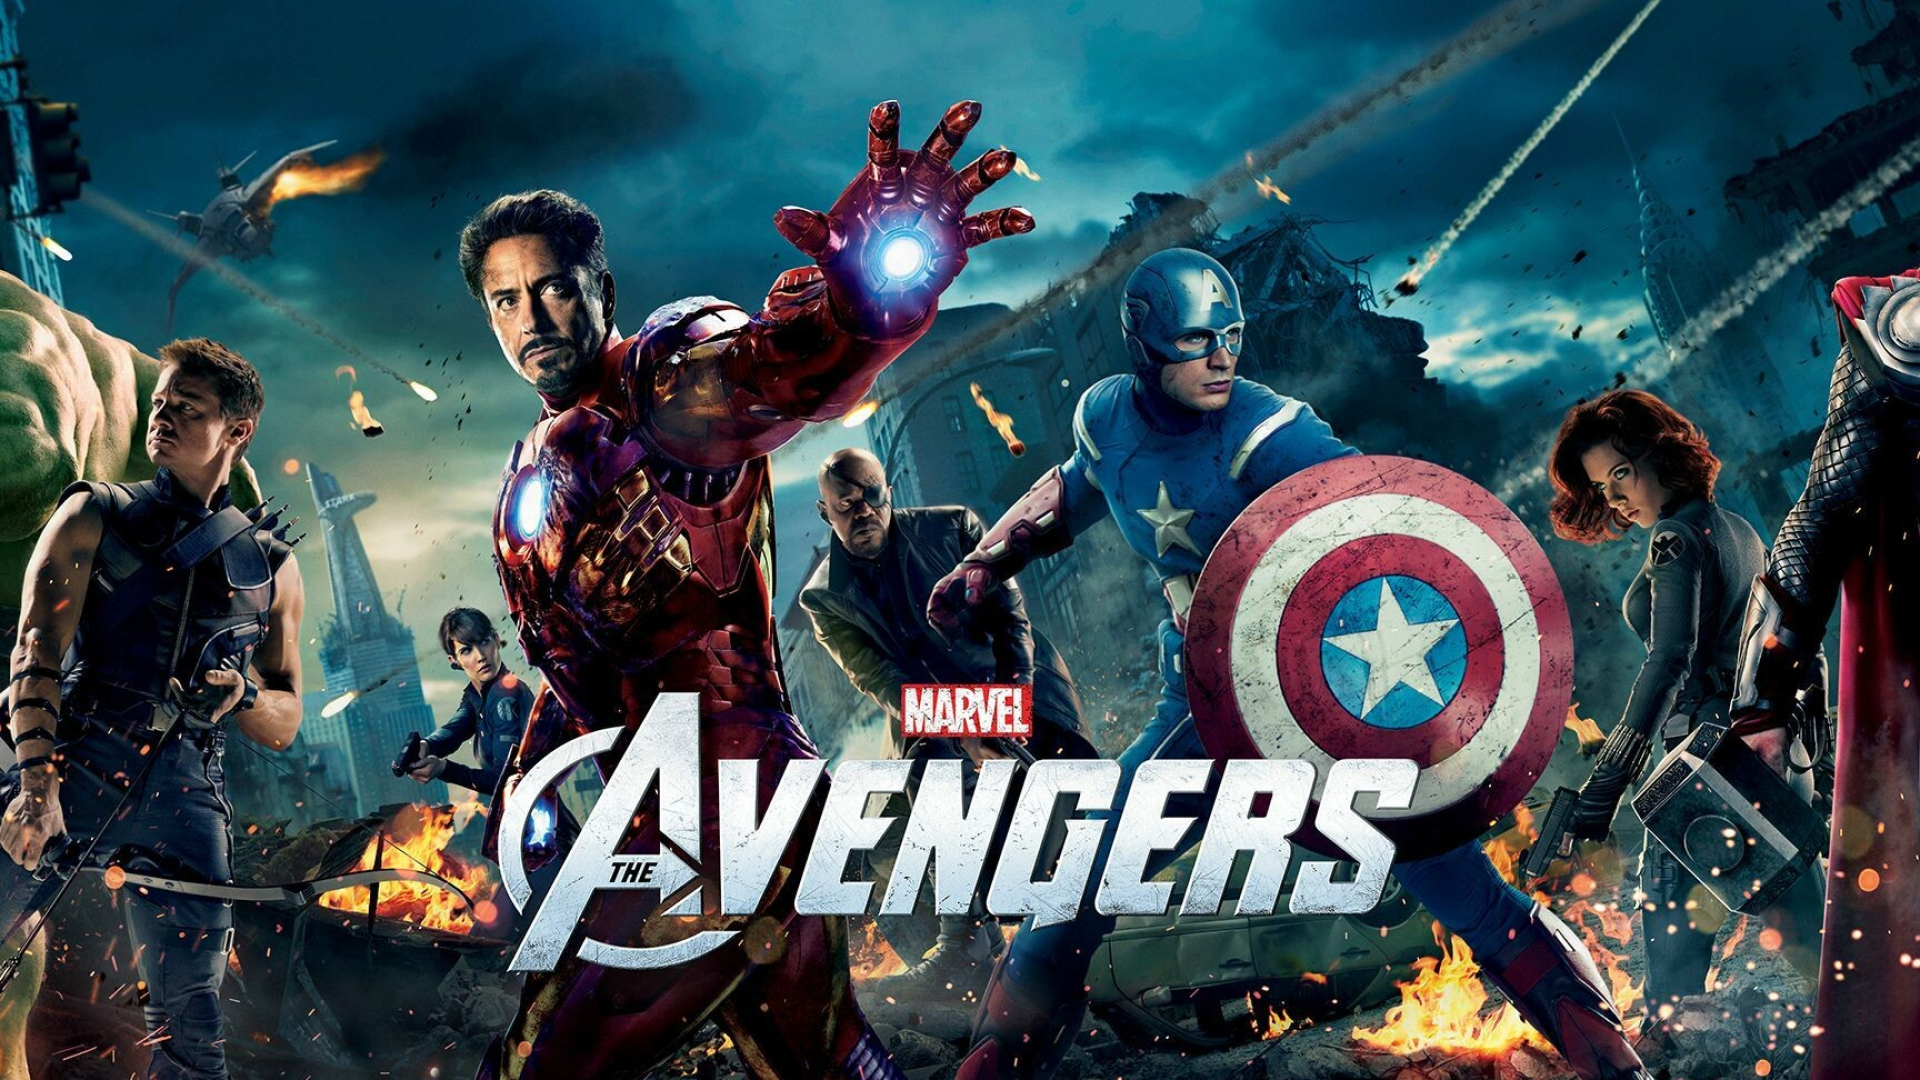 Avengers: Earth’s mightiest warriors, Movie, Poster, Action film. 1920x1080 Full HD Wallpaper.